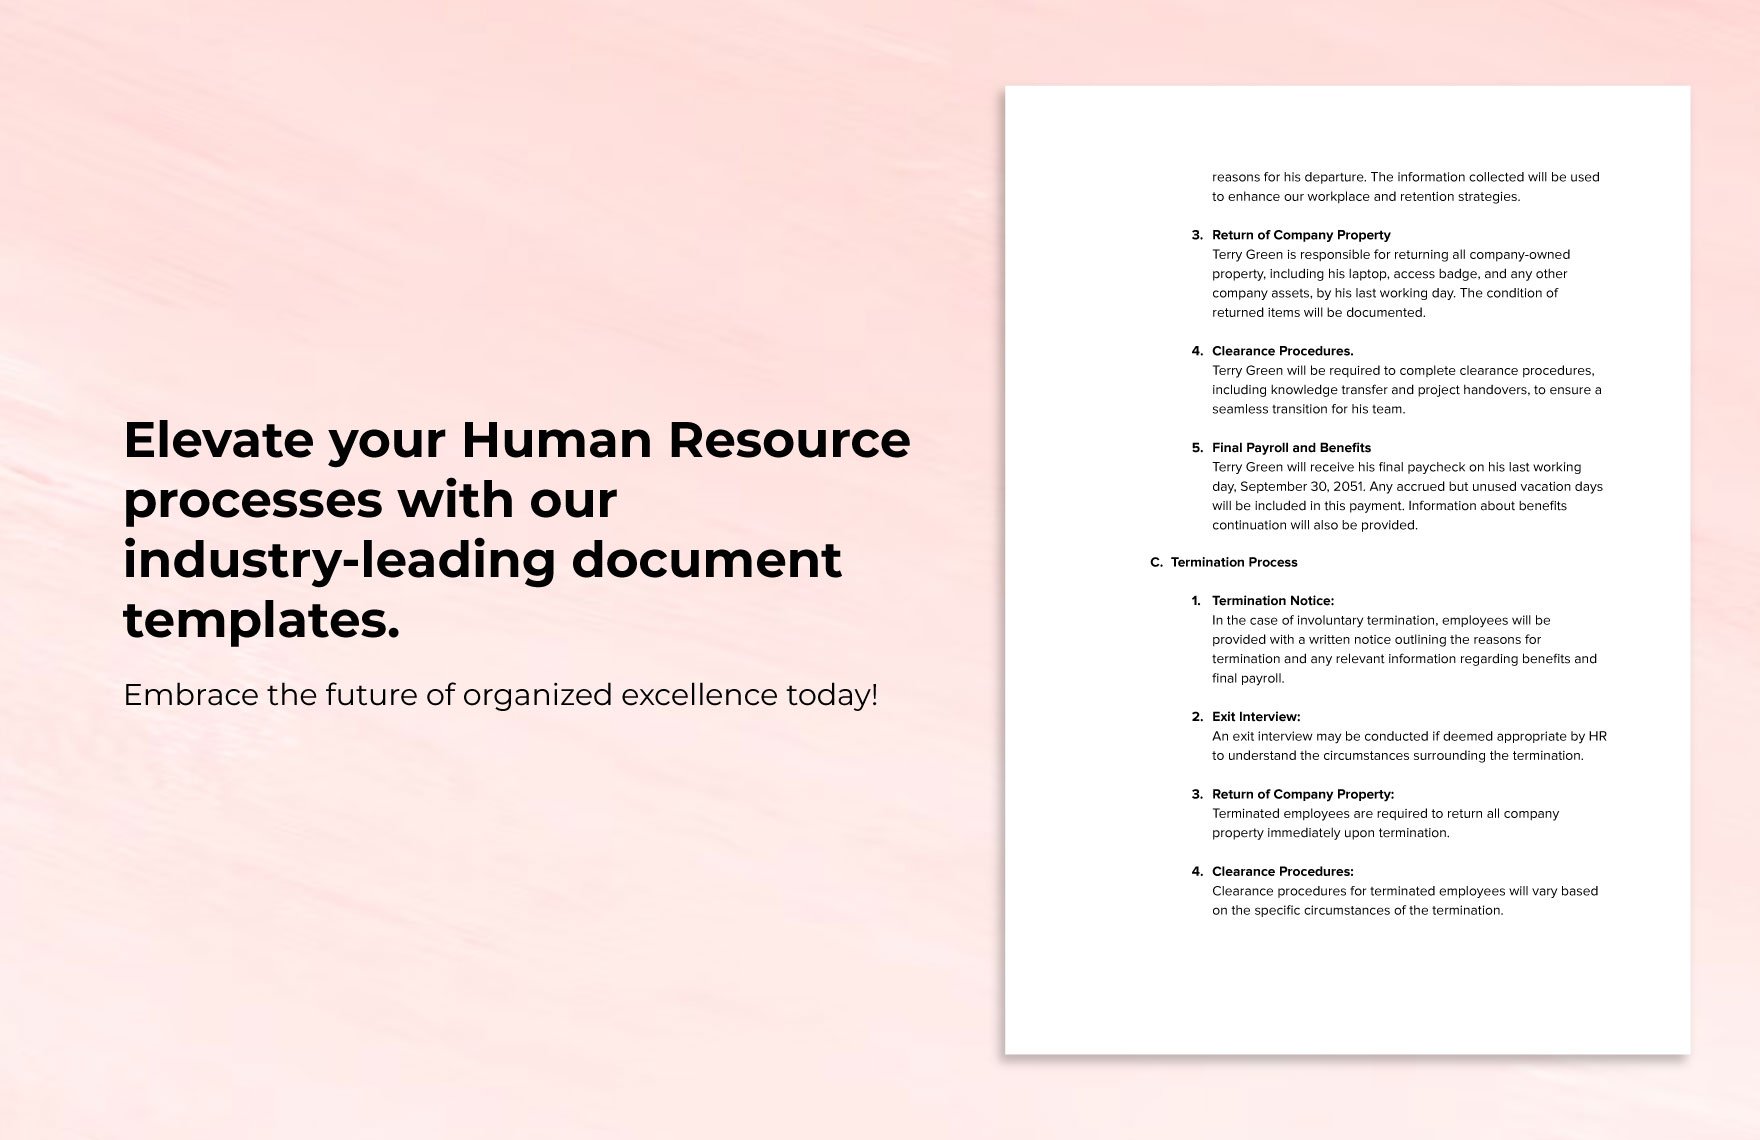 Employee Exit and Legal Compliance Guide HR Template